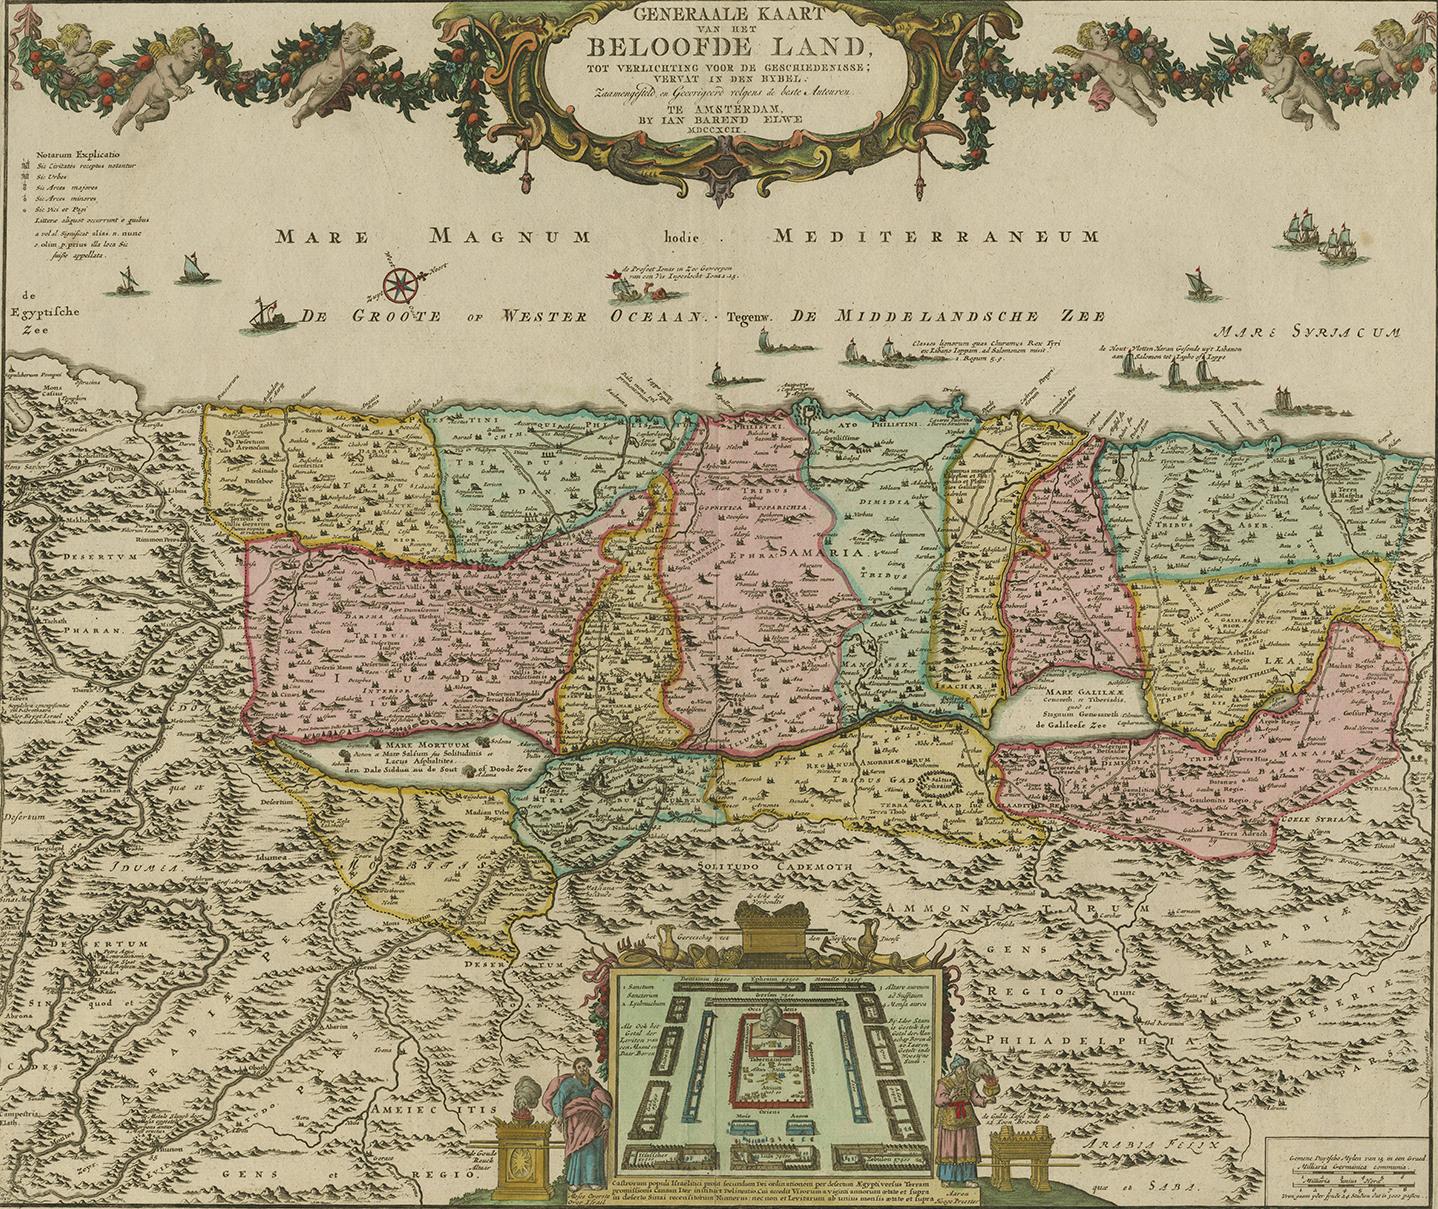 Large, detailed map of the Holy Land based on De Wit`s map. West is oriented to the top of the map, which is spanned by a large title cartouche draped in a garland held aloft by six cherubs. The Mediterranean is filled with various types of ships